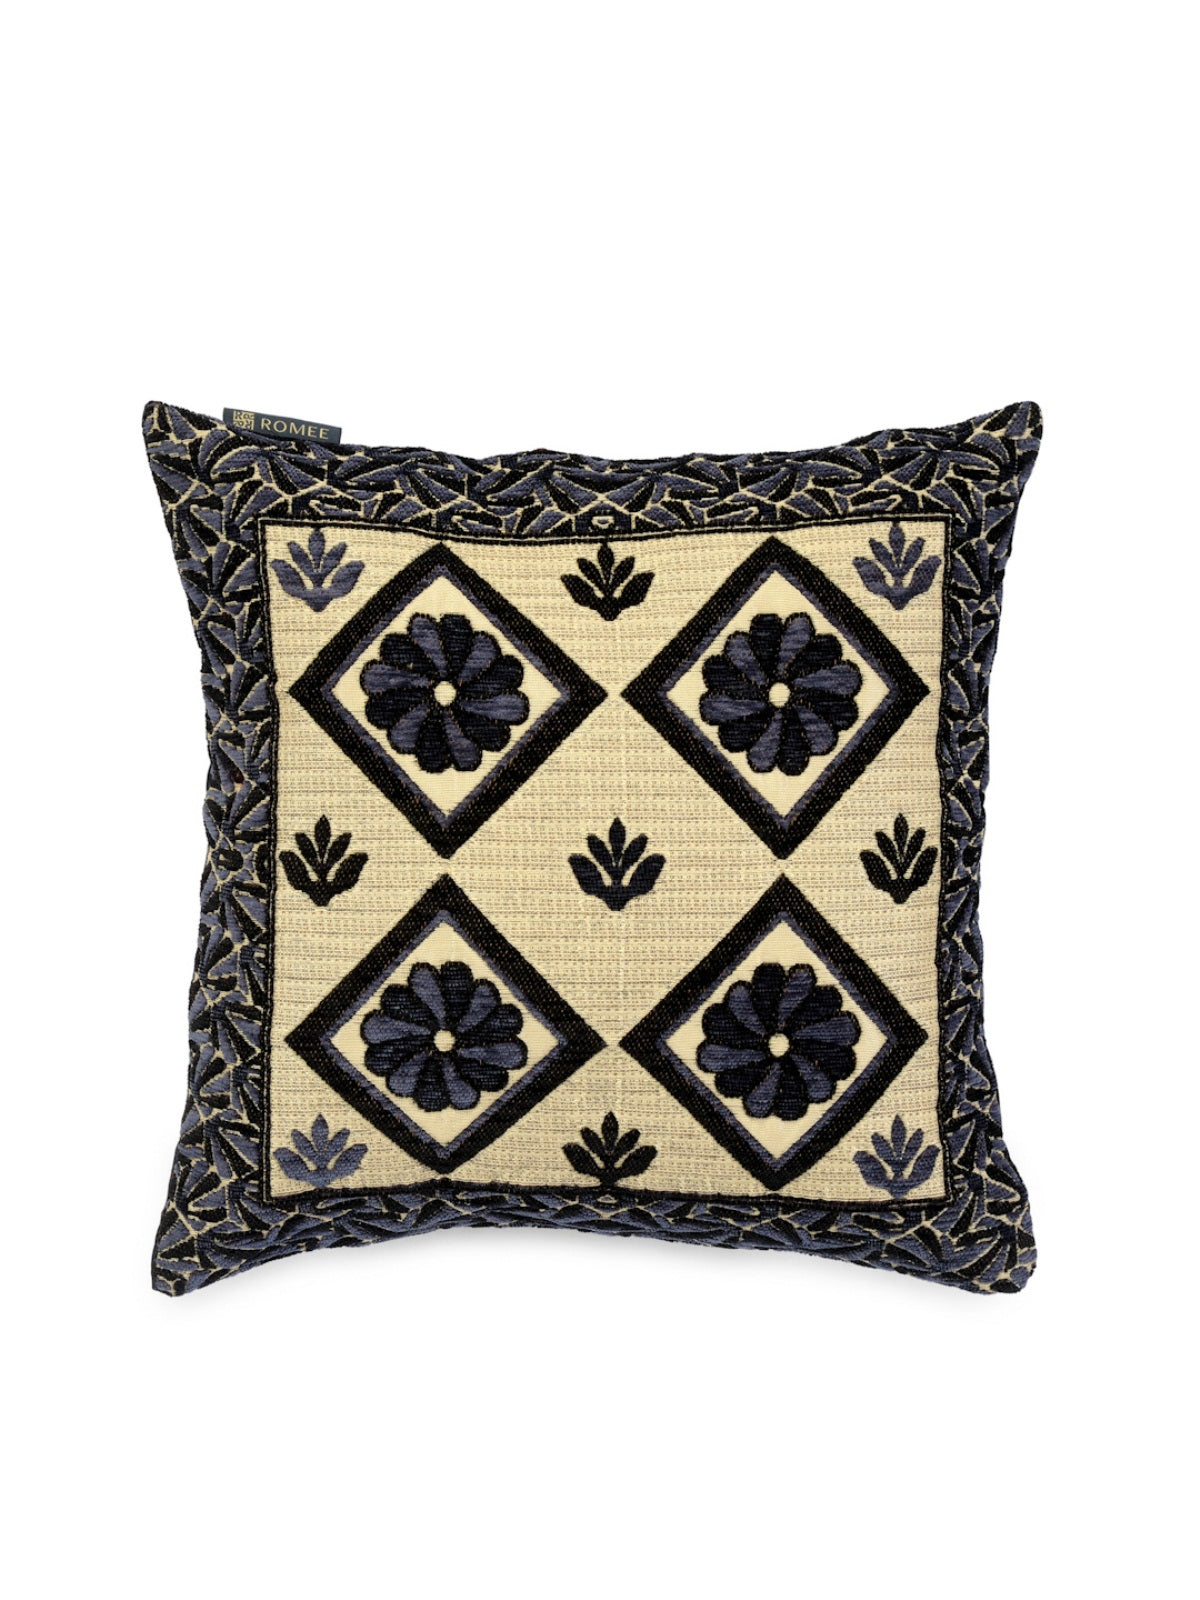 Soft Chenille Floral Throw Pillow/Cushion Cover 16 inch x 16 inch, Set of 5 - Black